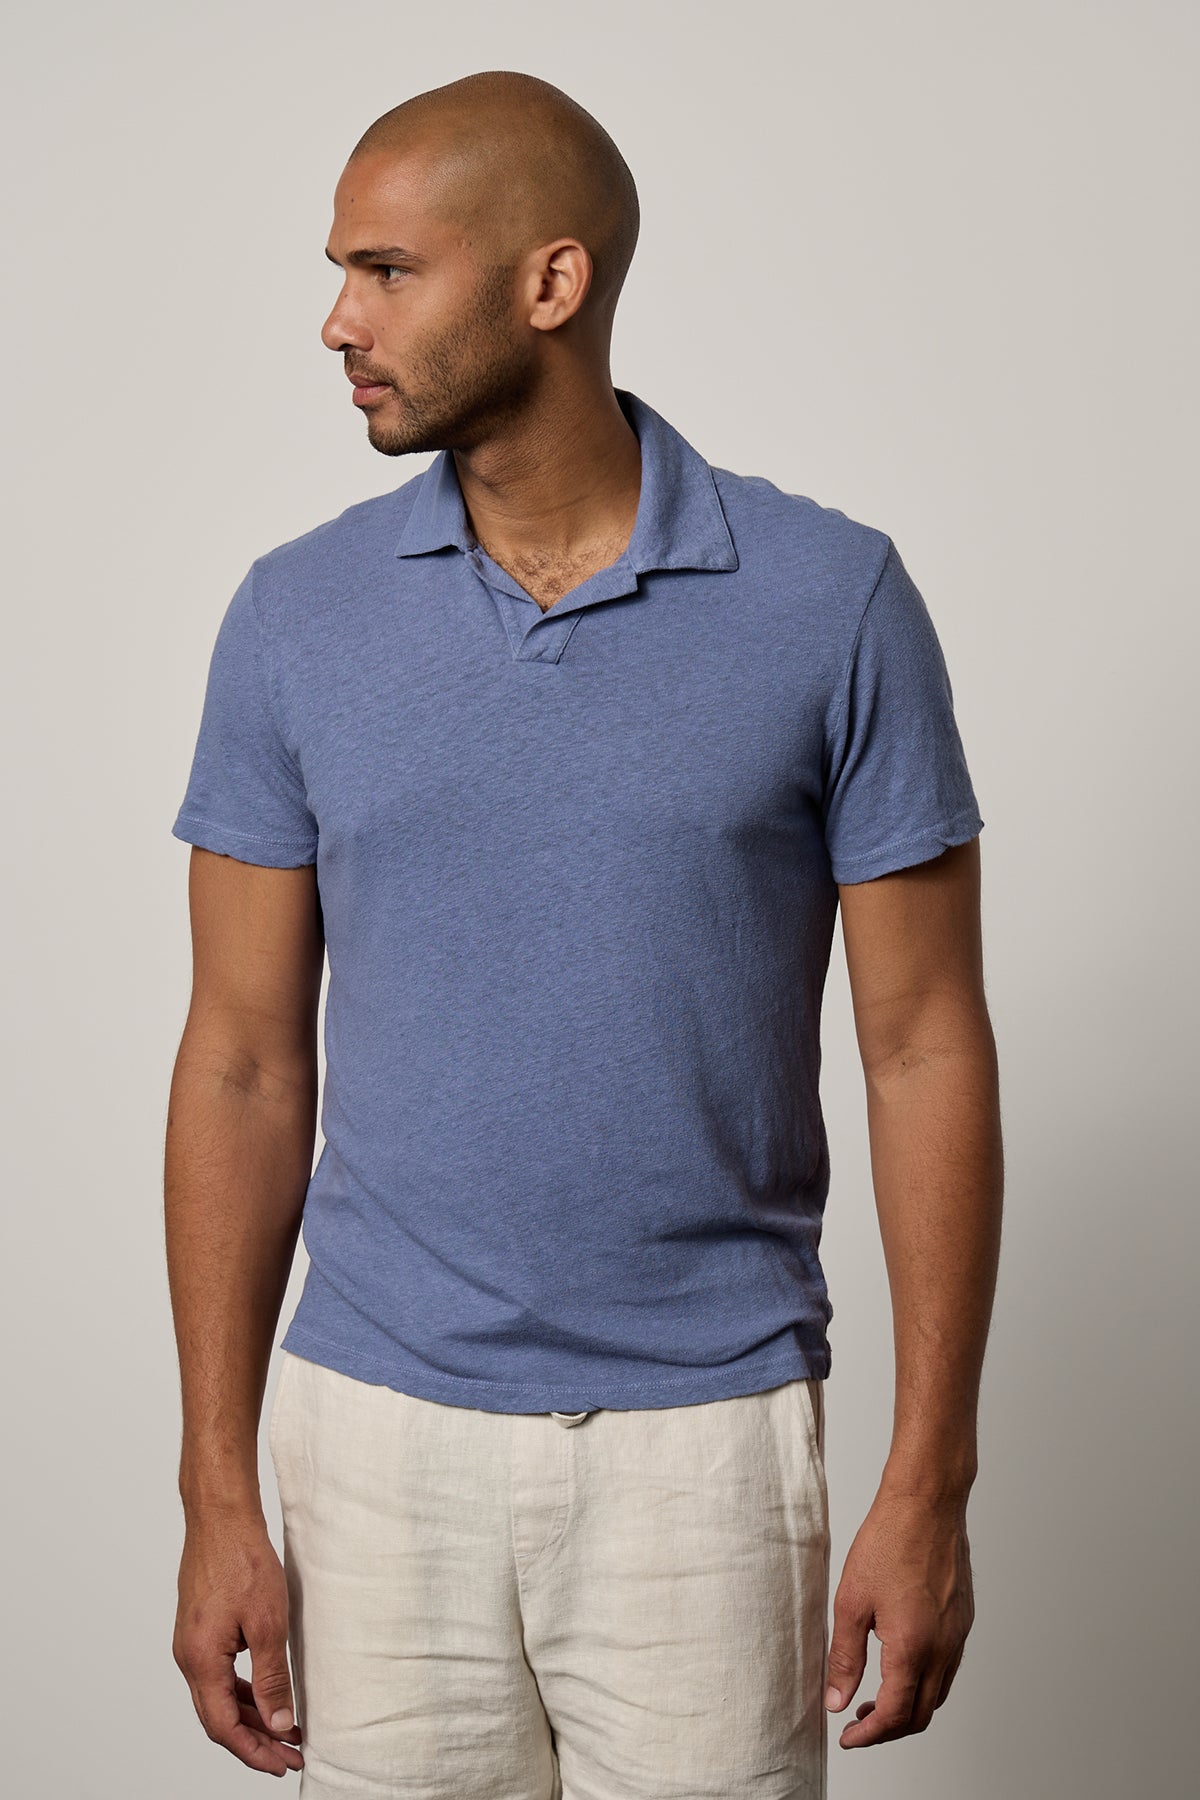 Beck Linen Blend Polo in marine blue front-26249456025793